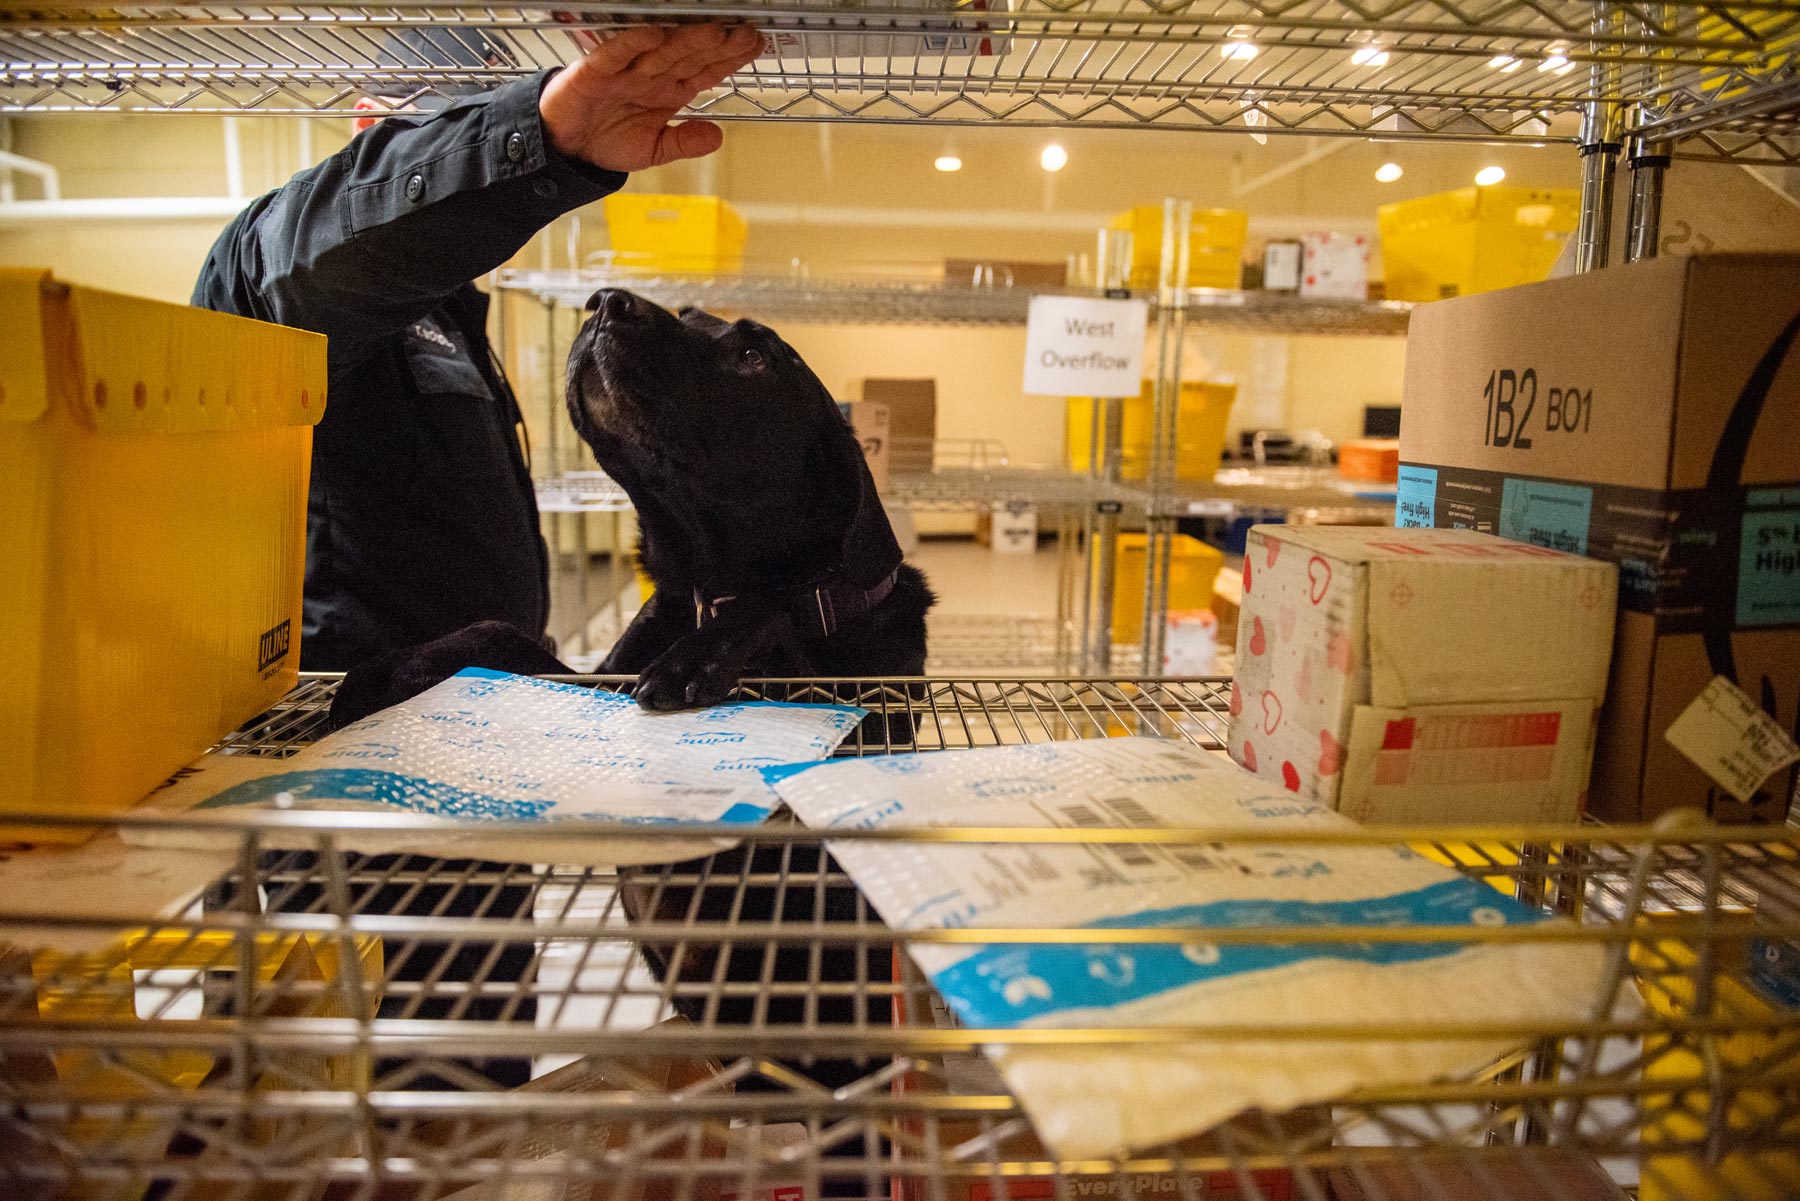 An OUPD K9 officer doing routine checks in a dormitory mail room